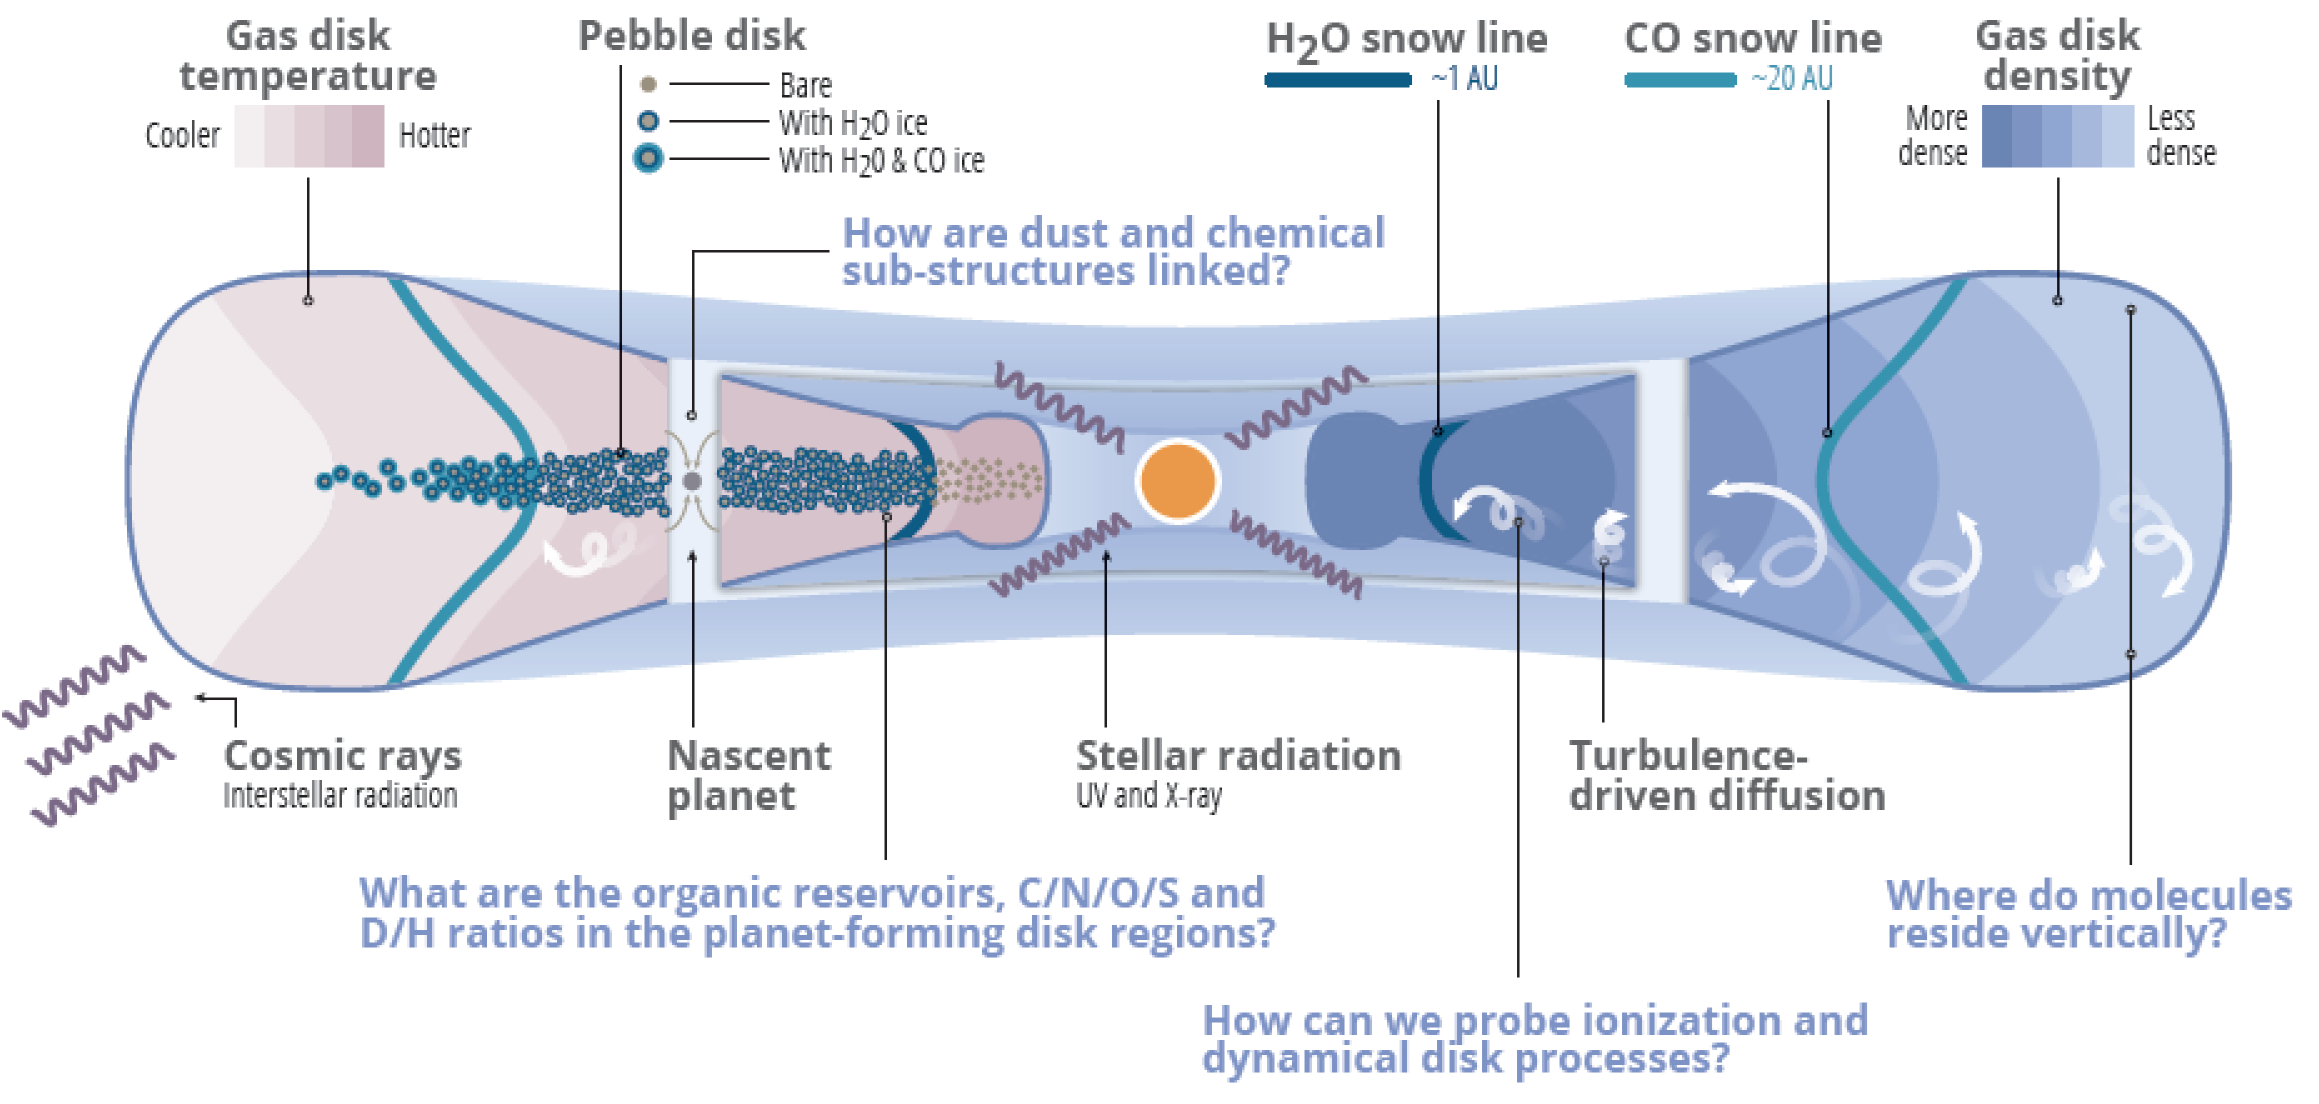 A schematic representation of the interlinked physical and chemical processes that occur in protoplanetary disks.